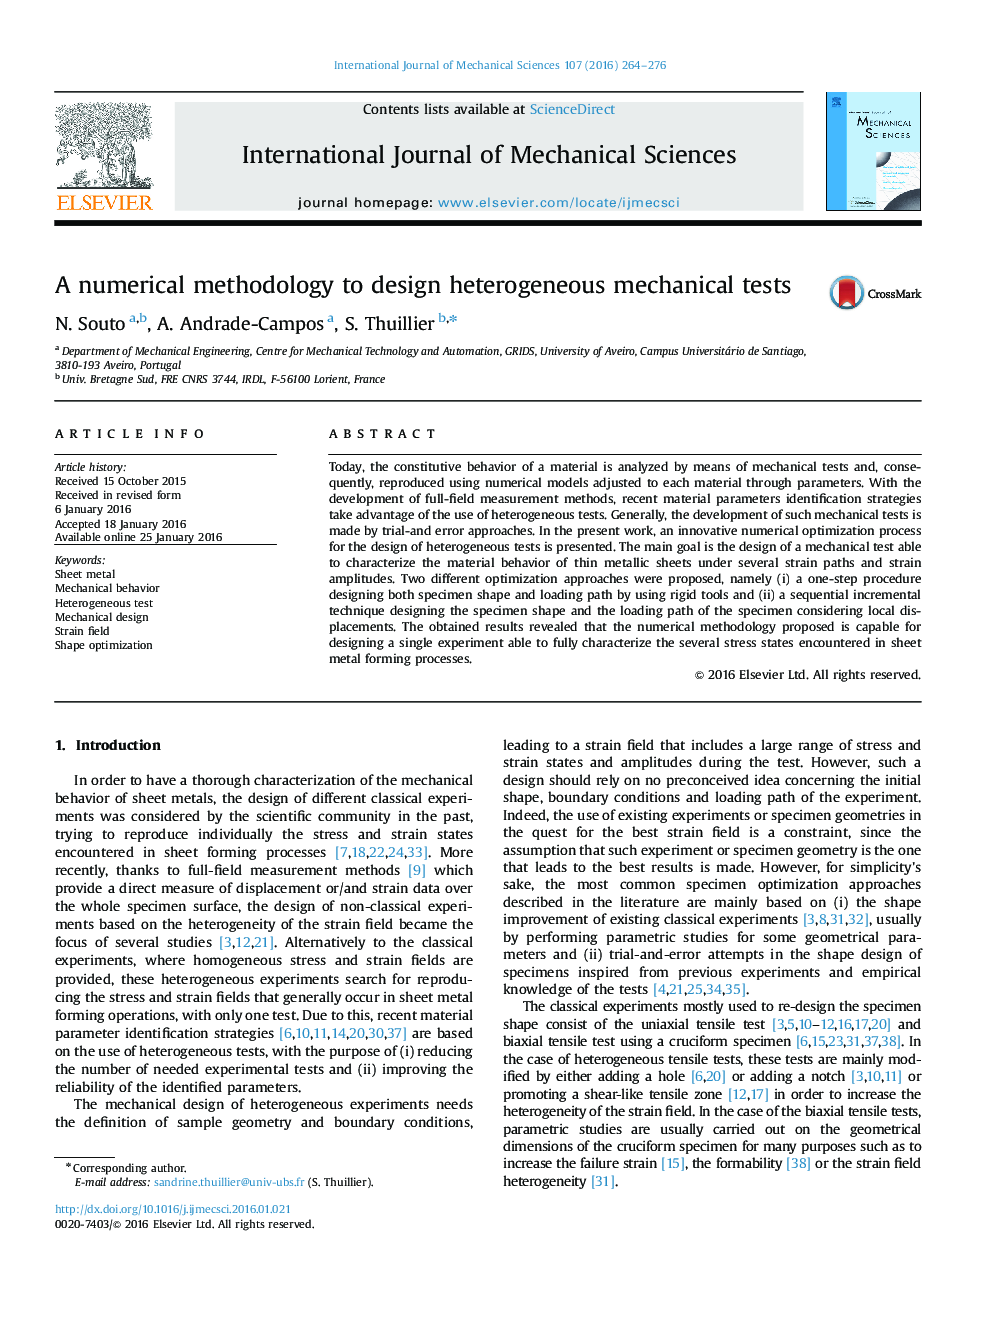 A numerical methodology to design heterogeneous mechanical tests